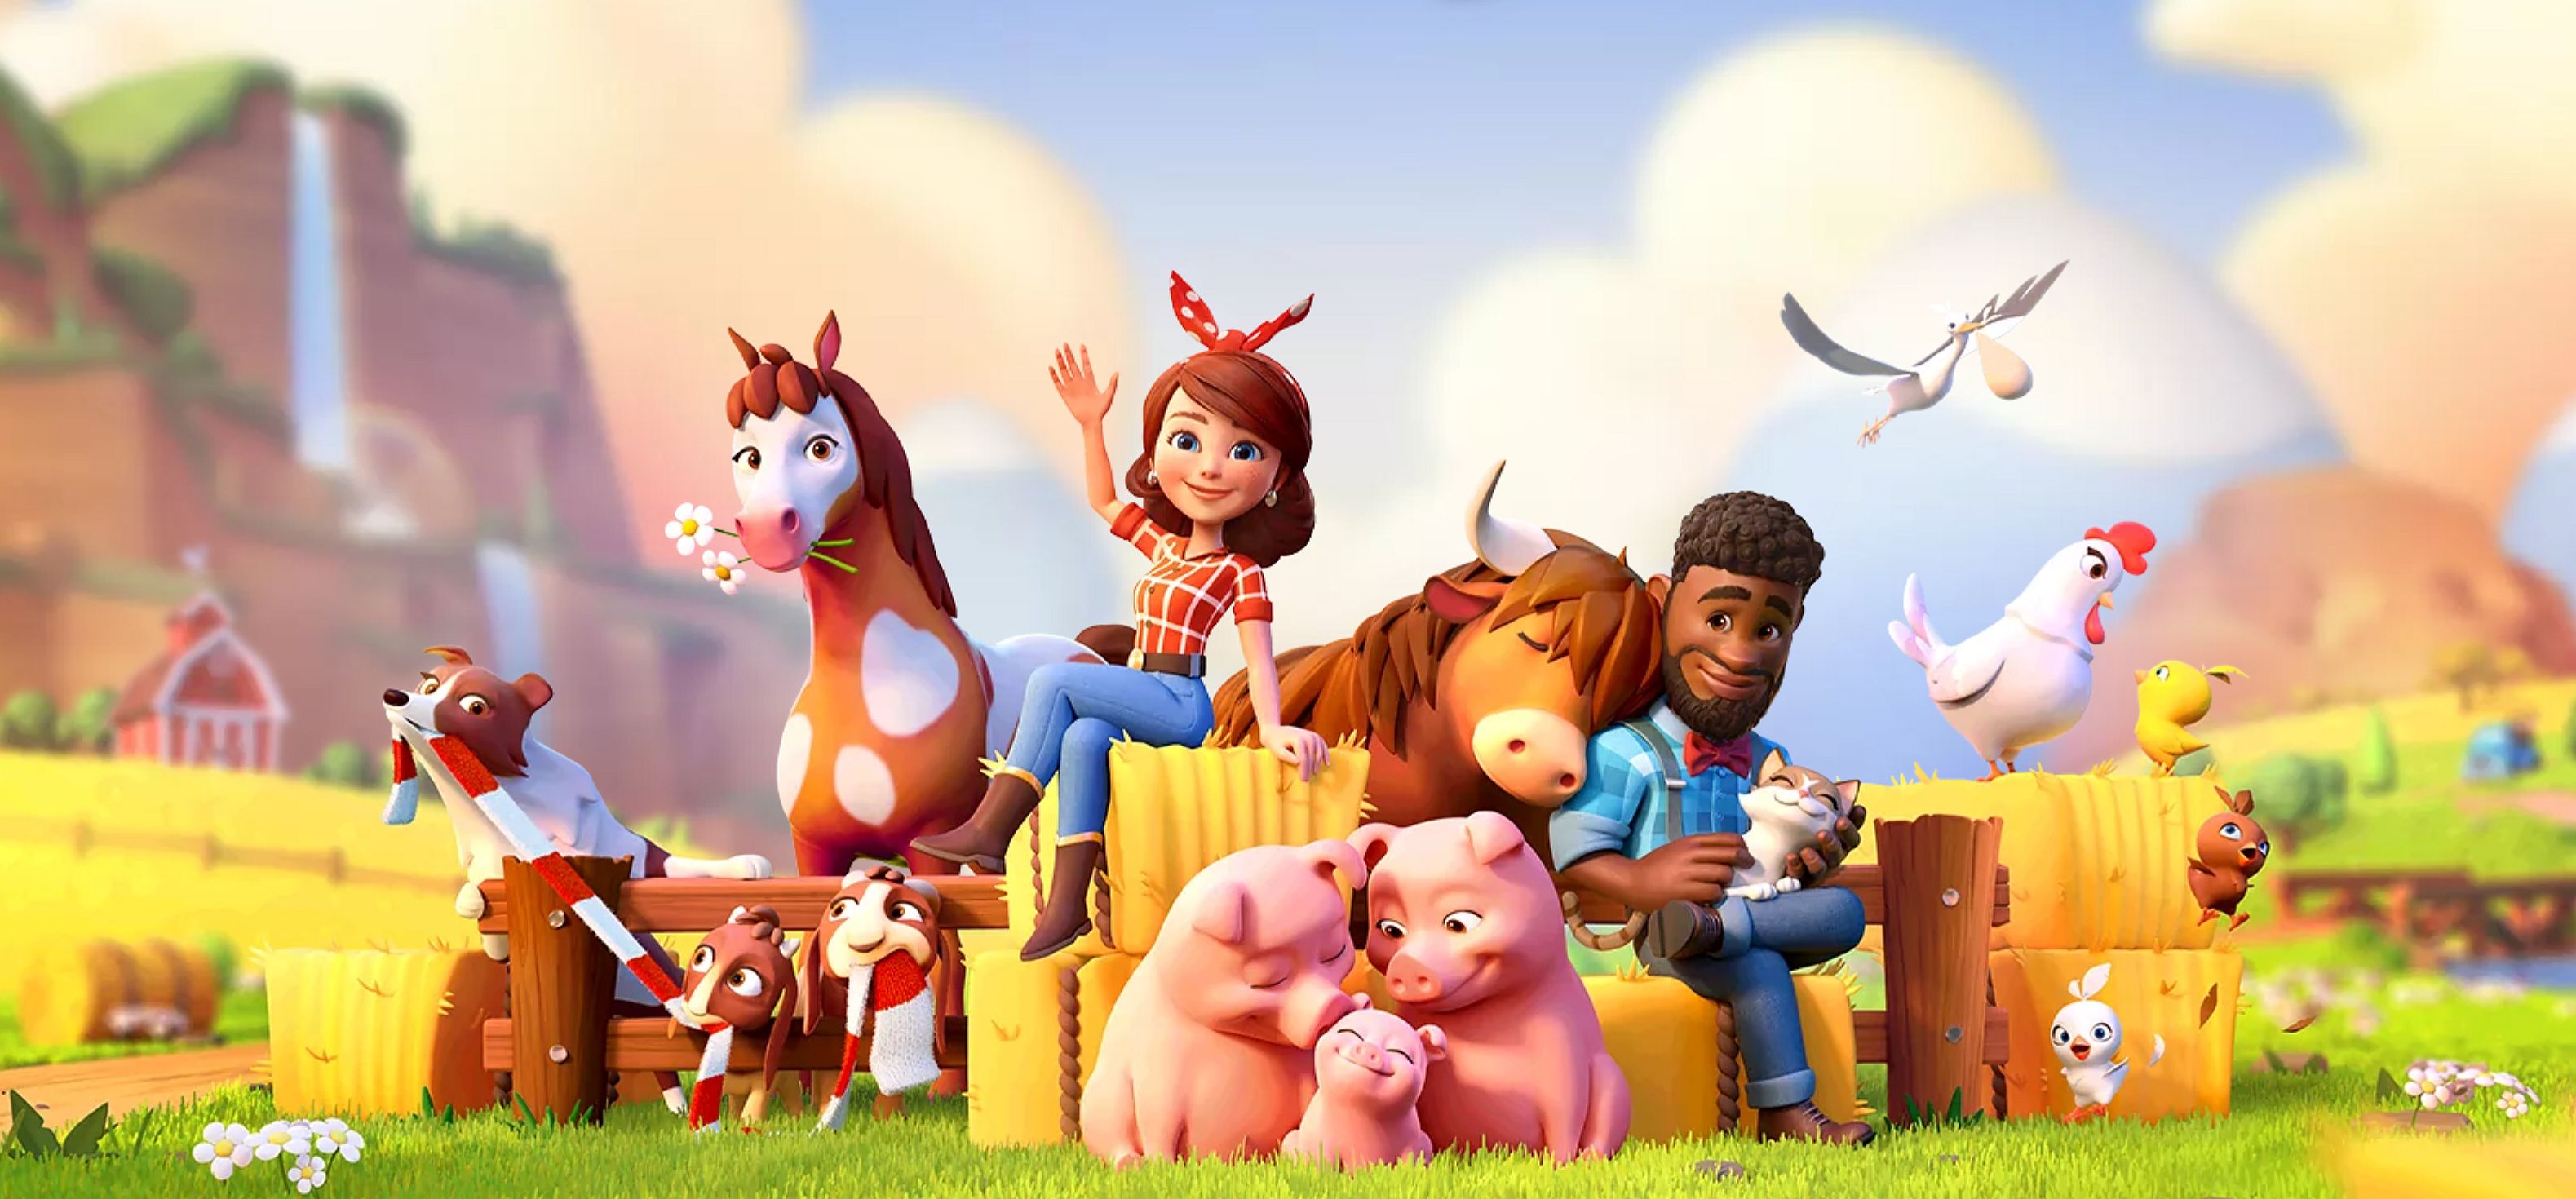 Image for GTA parent company Take-Two acquires FarmVille maker Zynga for $12.7 billion